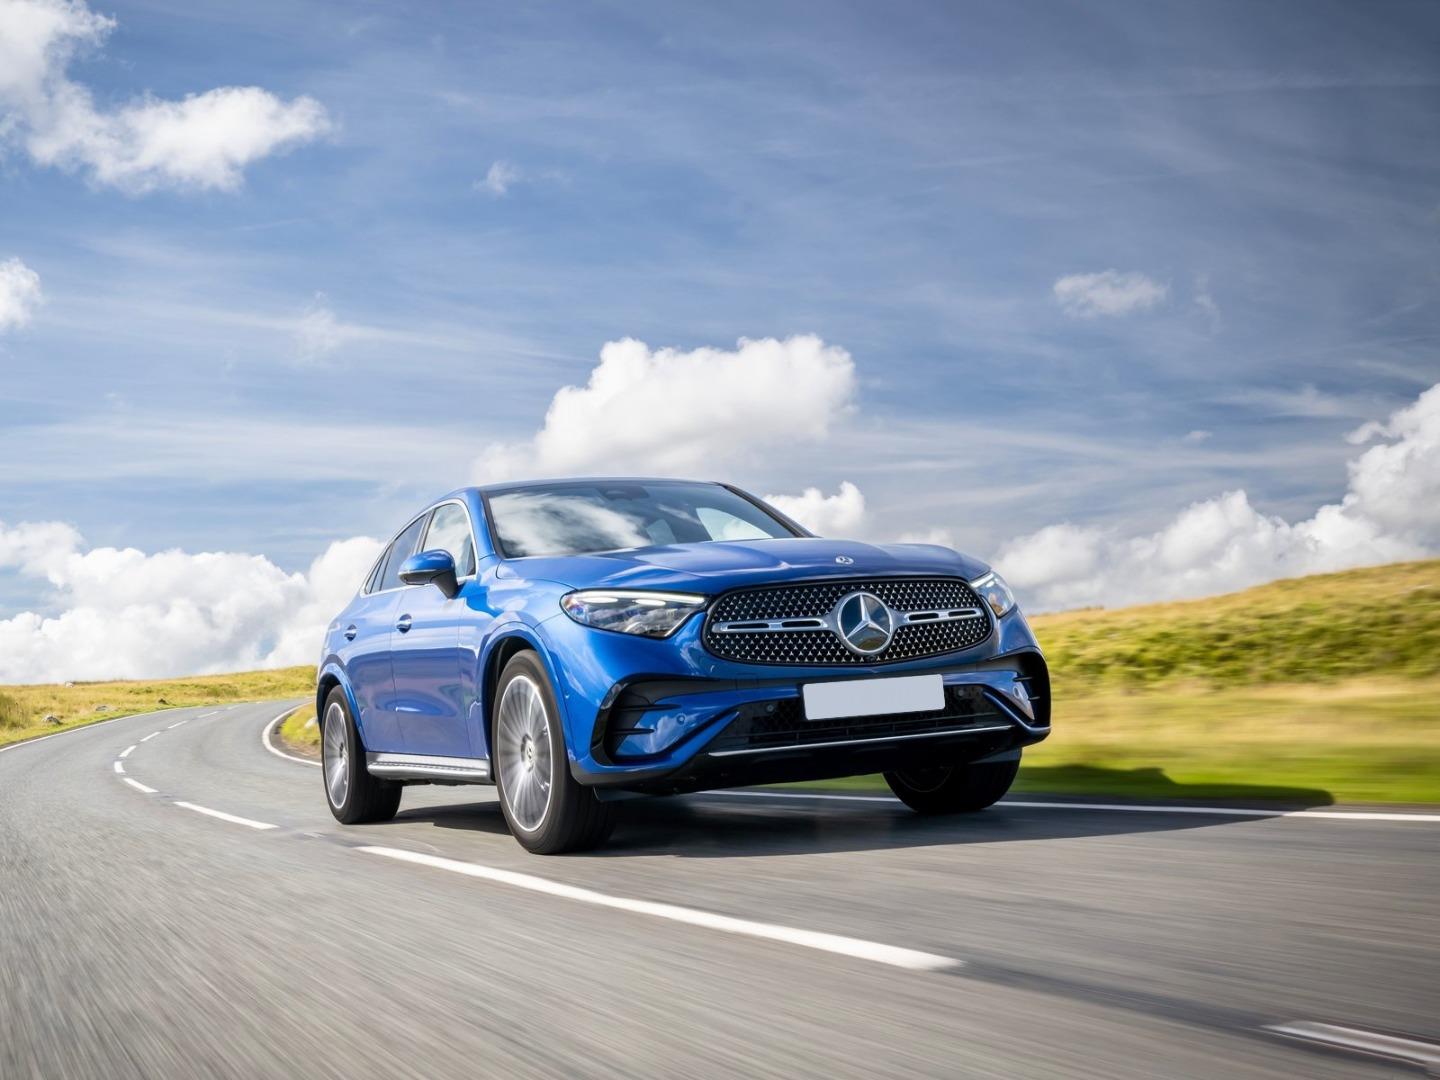 mercedes-benz glc coupé pricing and specification revealed.